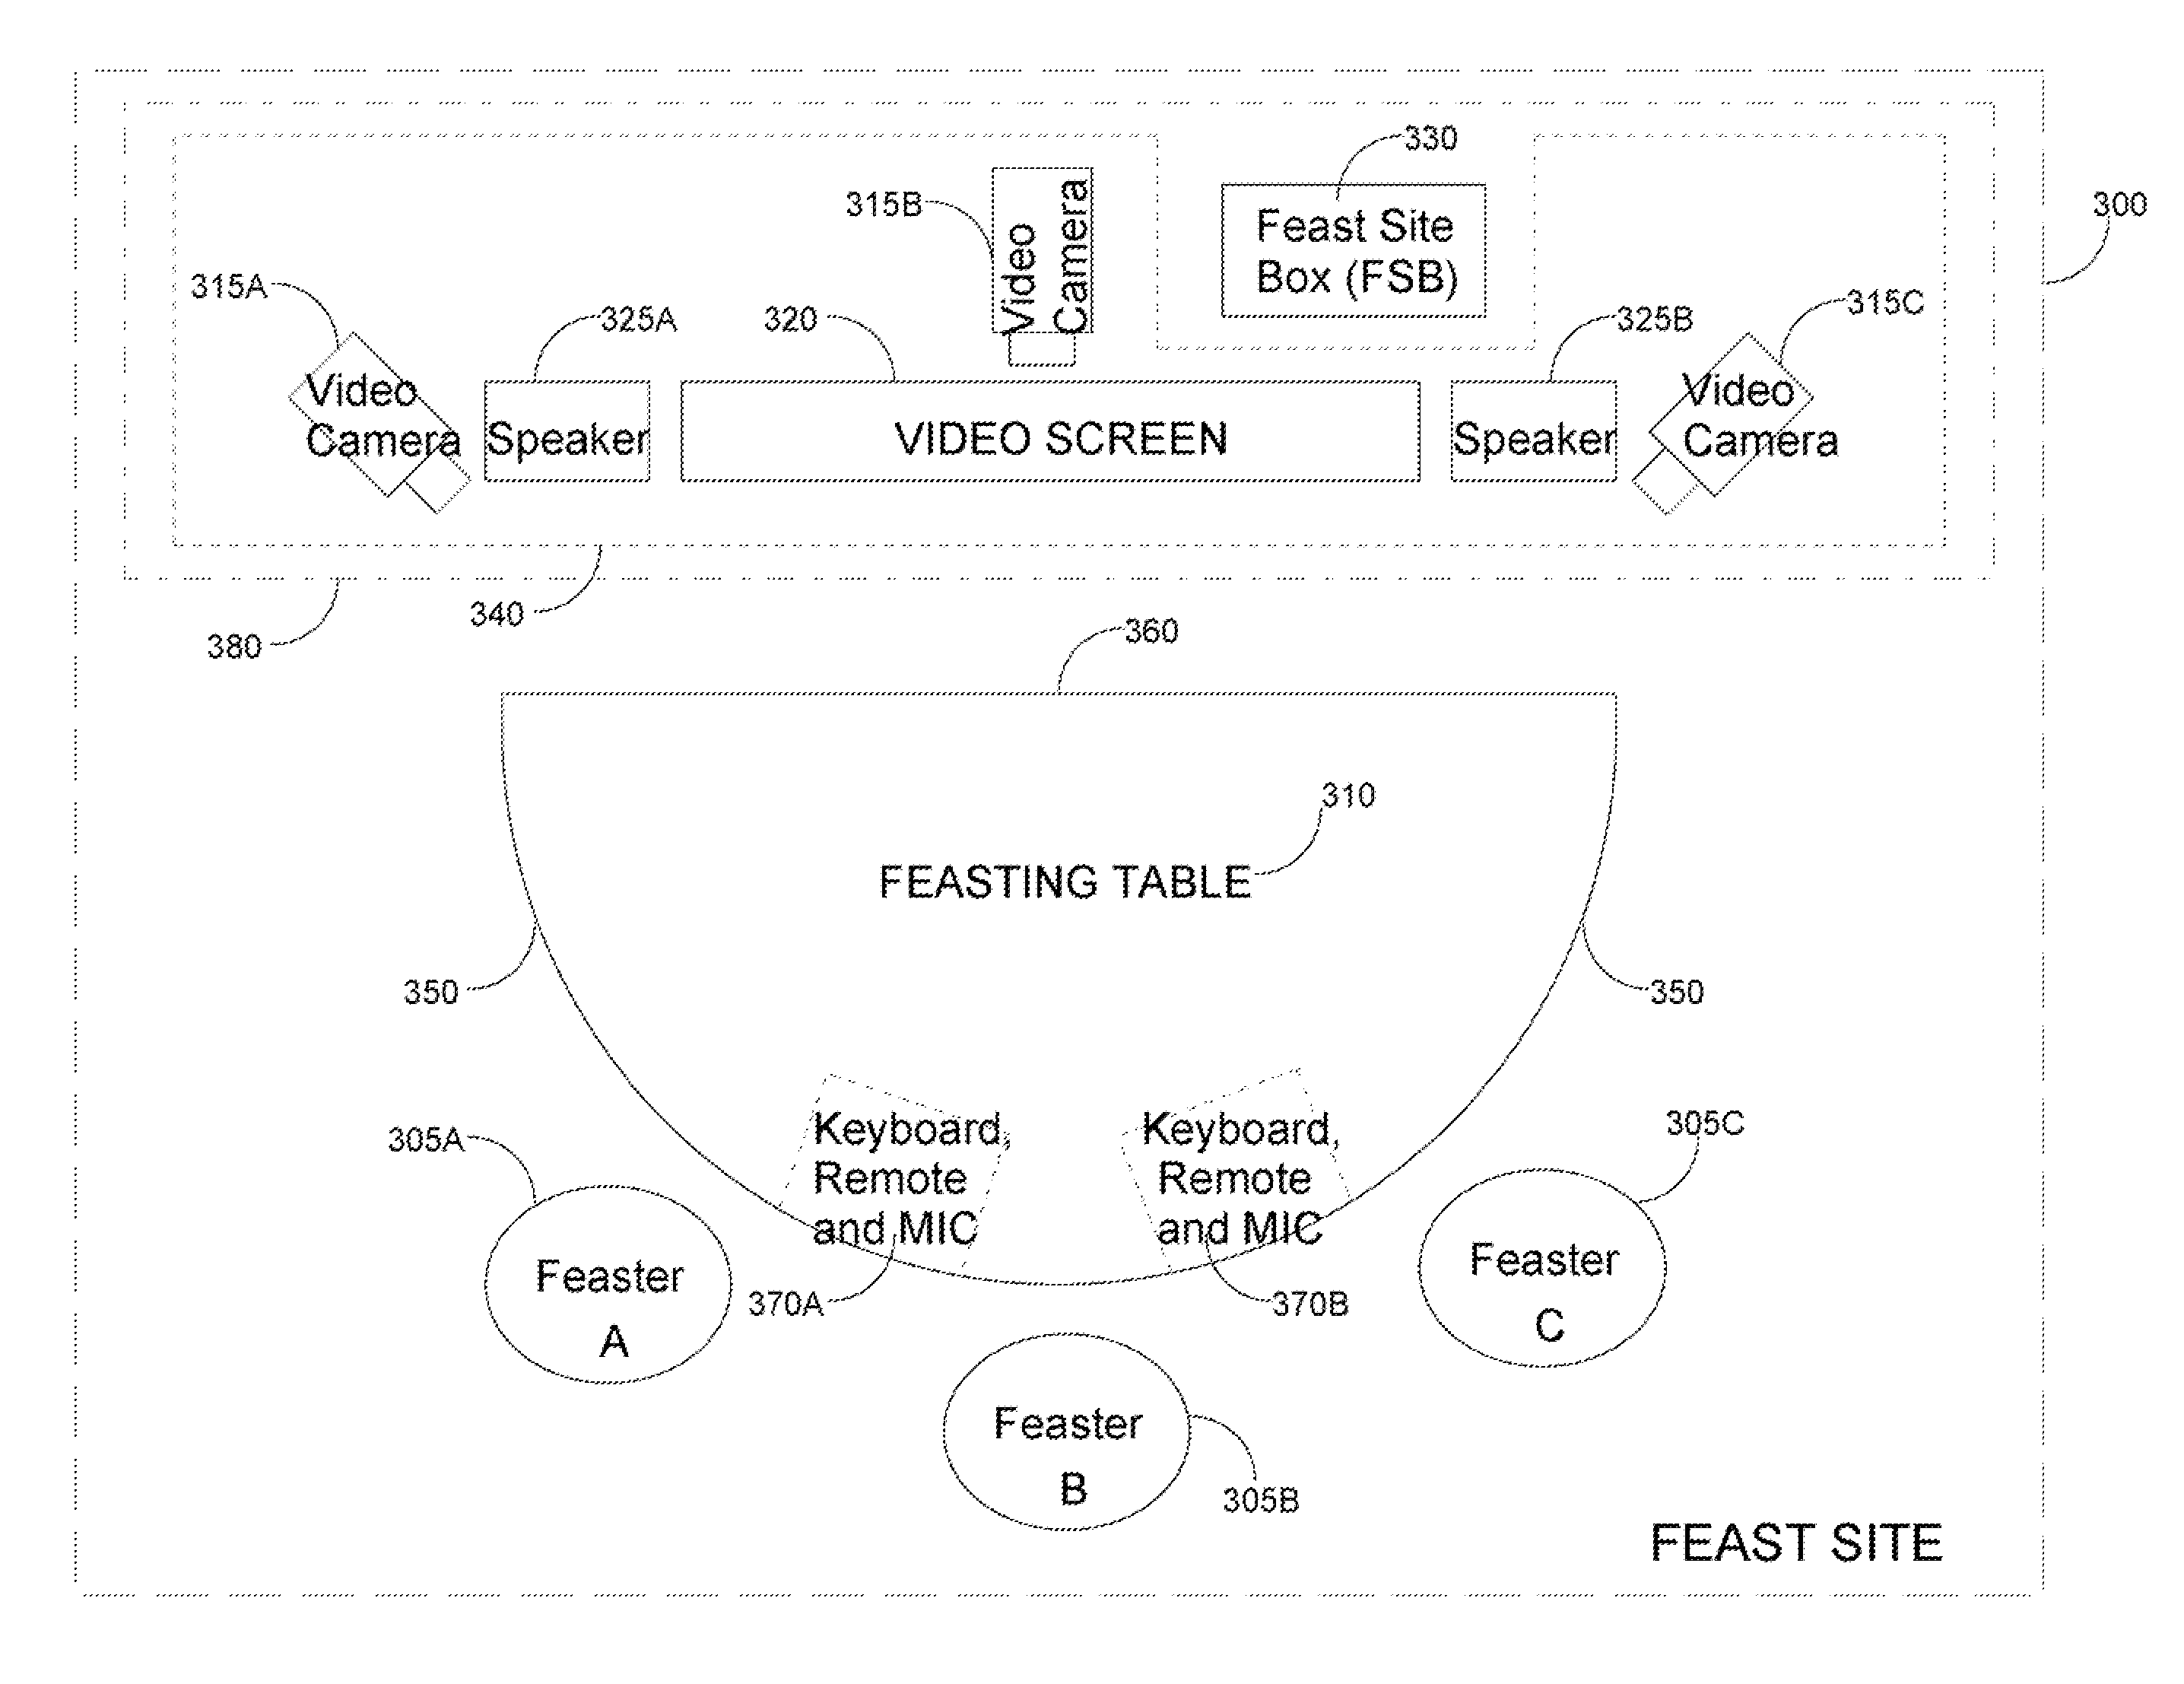 Method and apparatus for internet feast